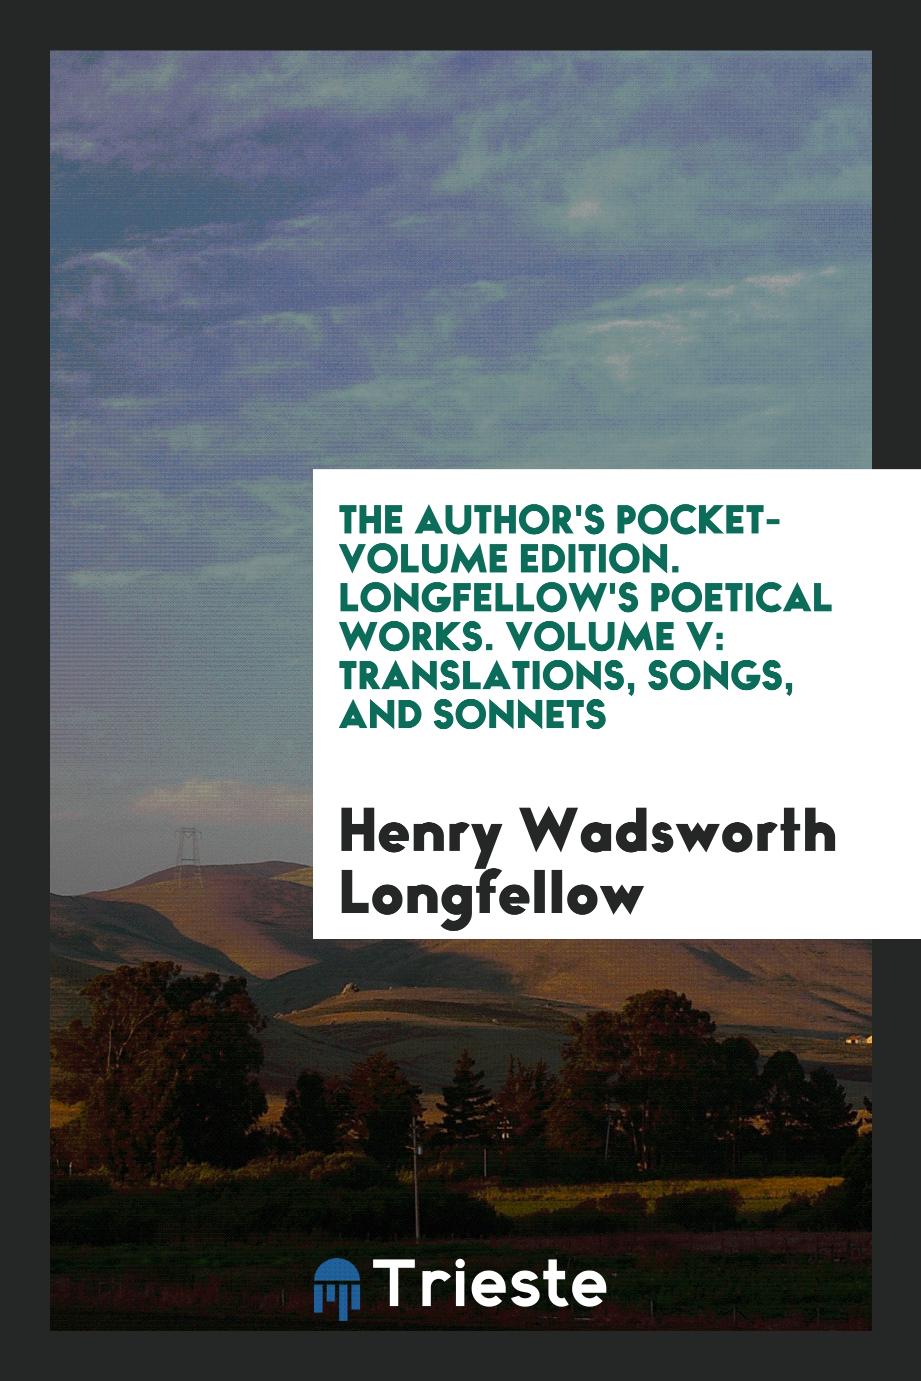 The Author's Pocket-Volume Edition. Longfellow's poetical works. Volume V: Translations, Songs, and Sonnets